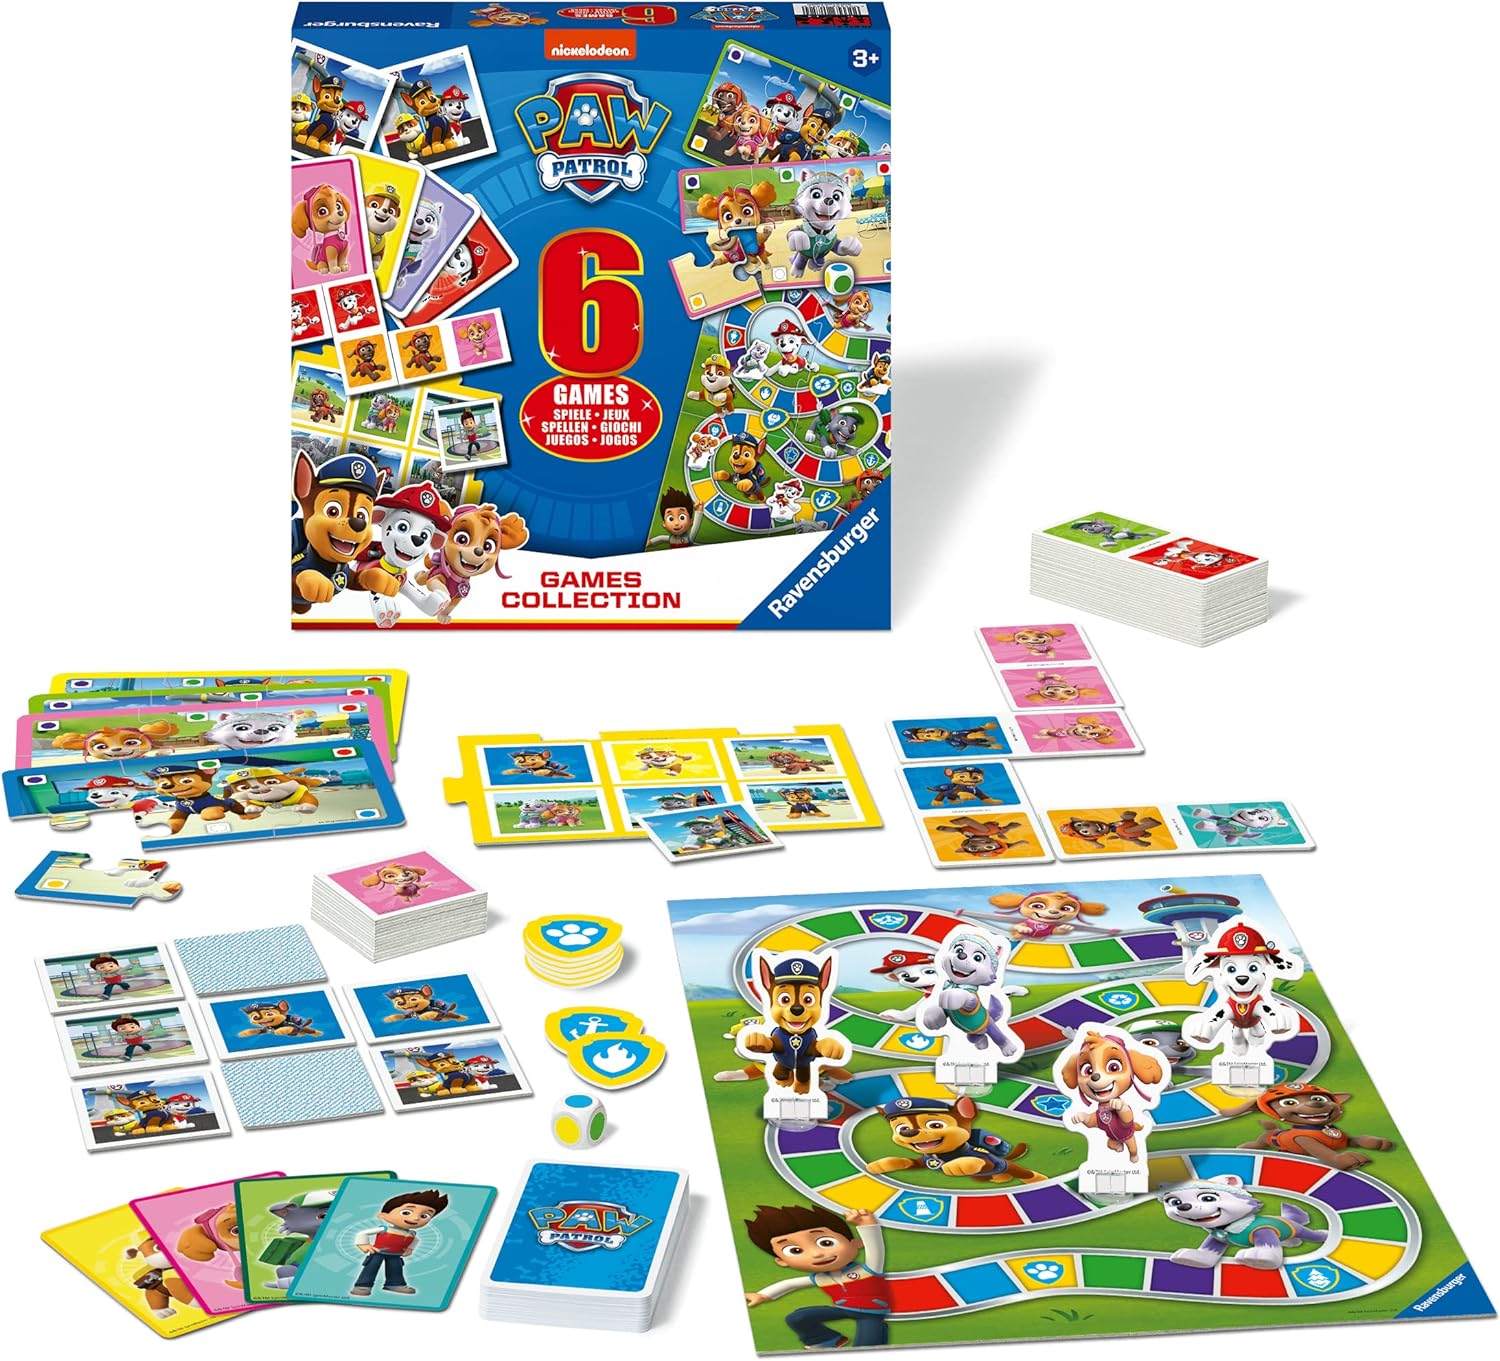 Paw Patrol: 6 Games Collection